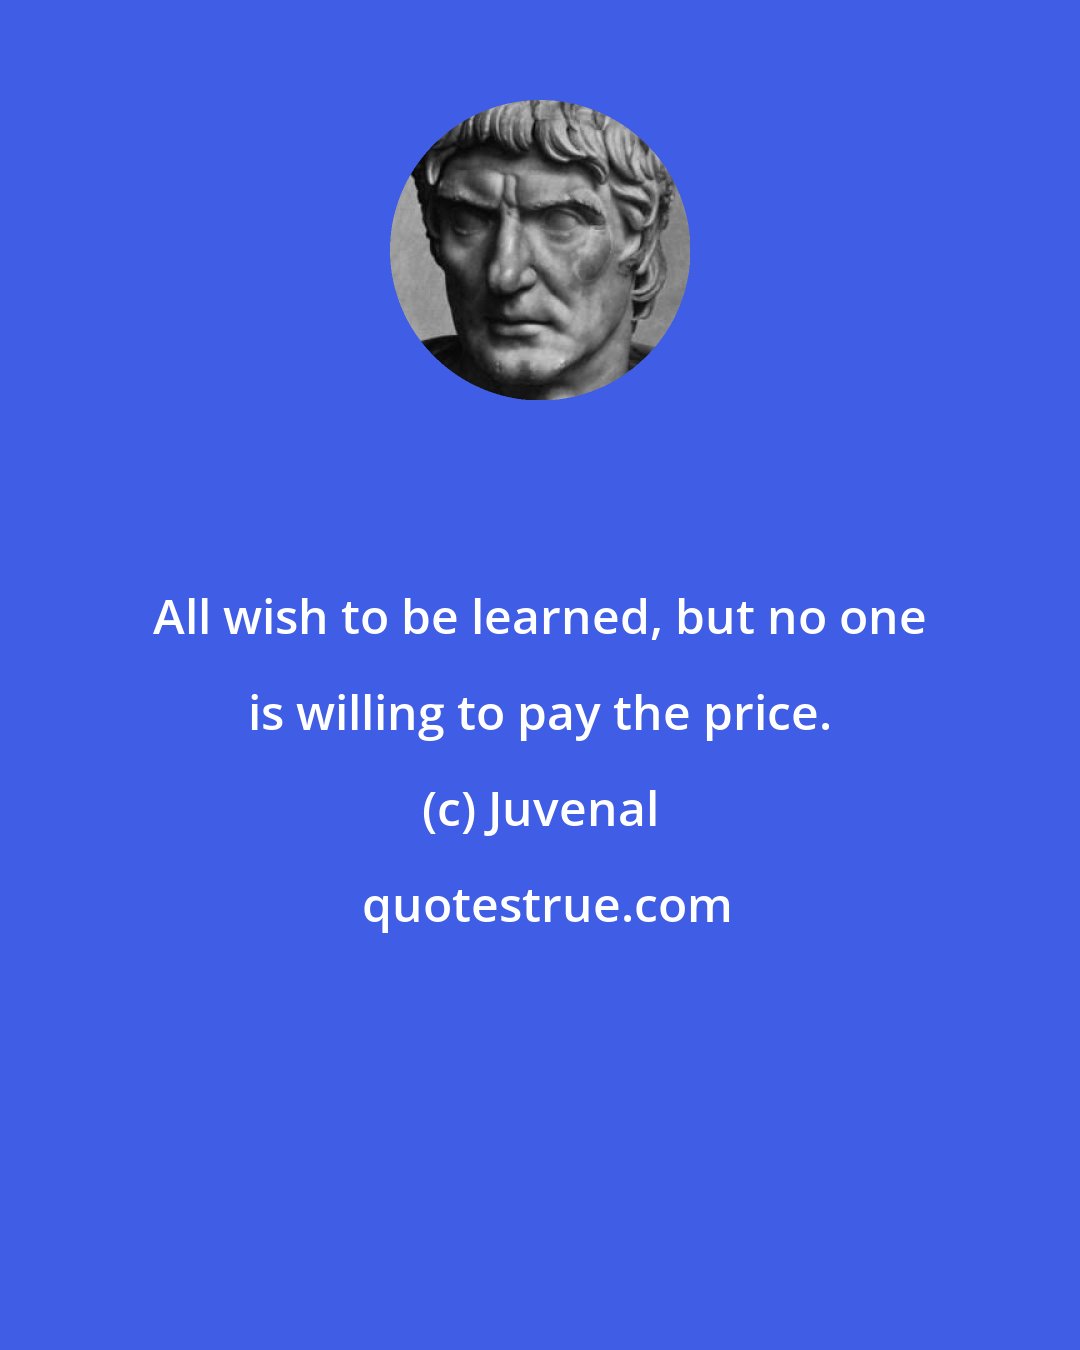 Juvenal: All wish to be learned, but no one is willing to pay the price.